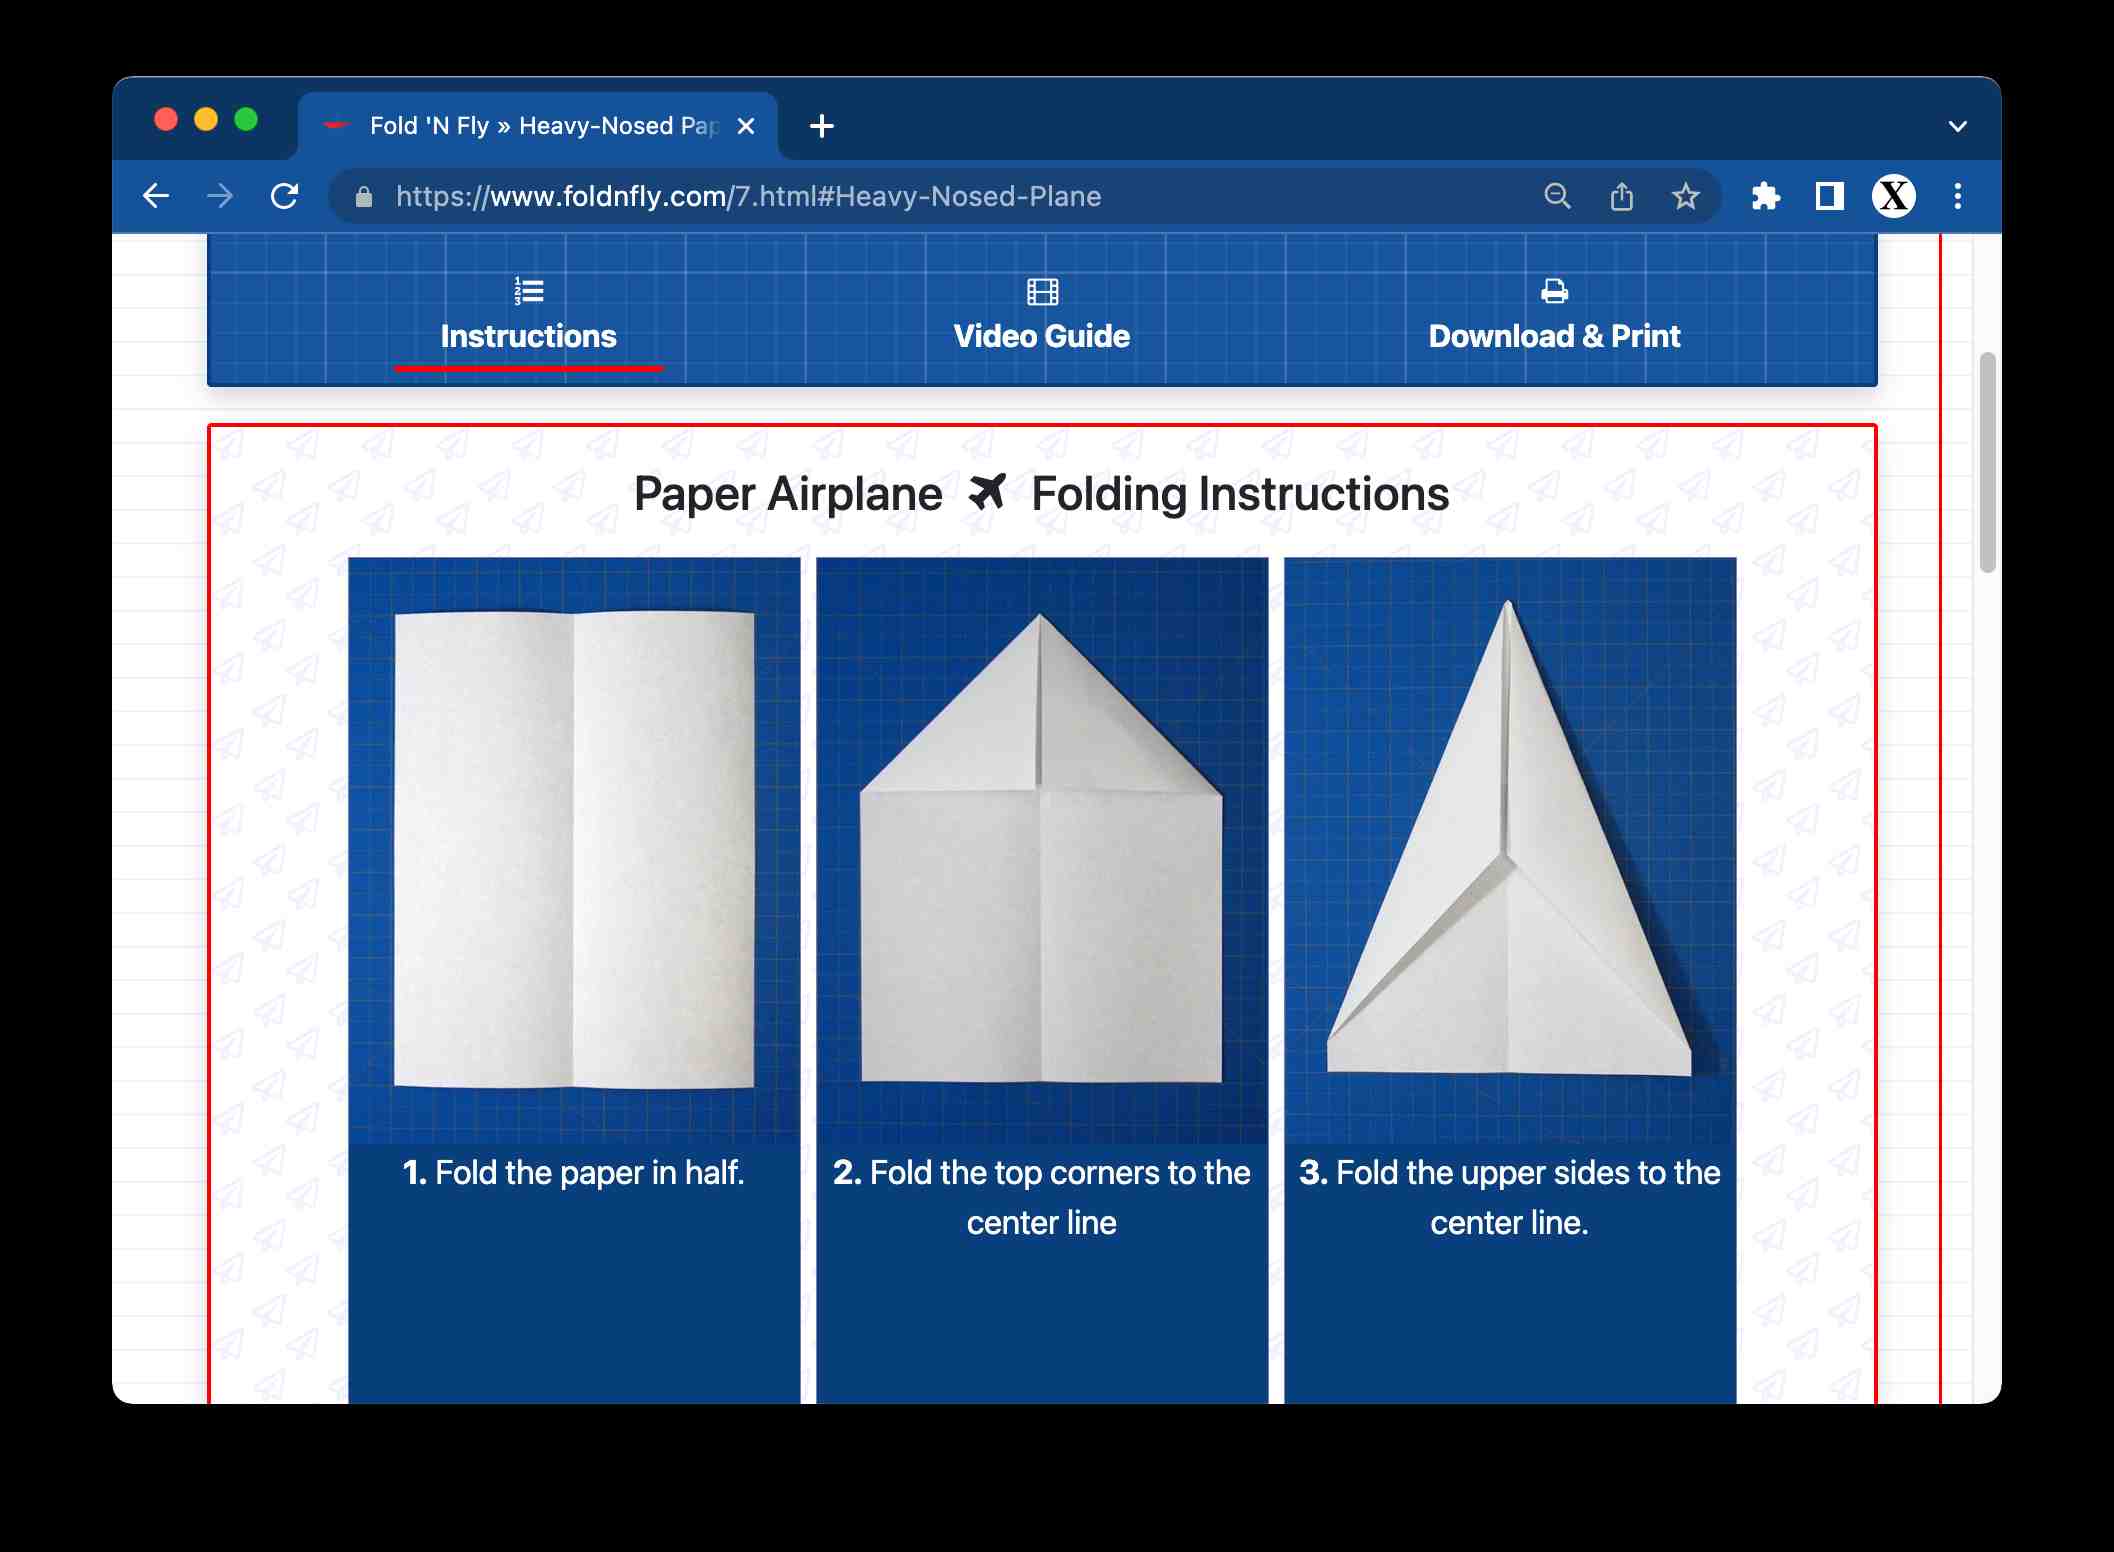 Fold 'N Fly - Paper Airplane Folding Instructions